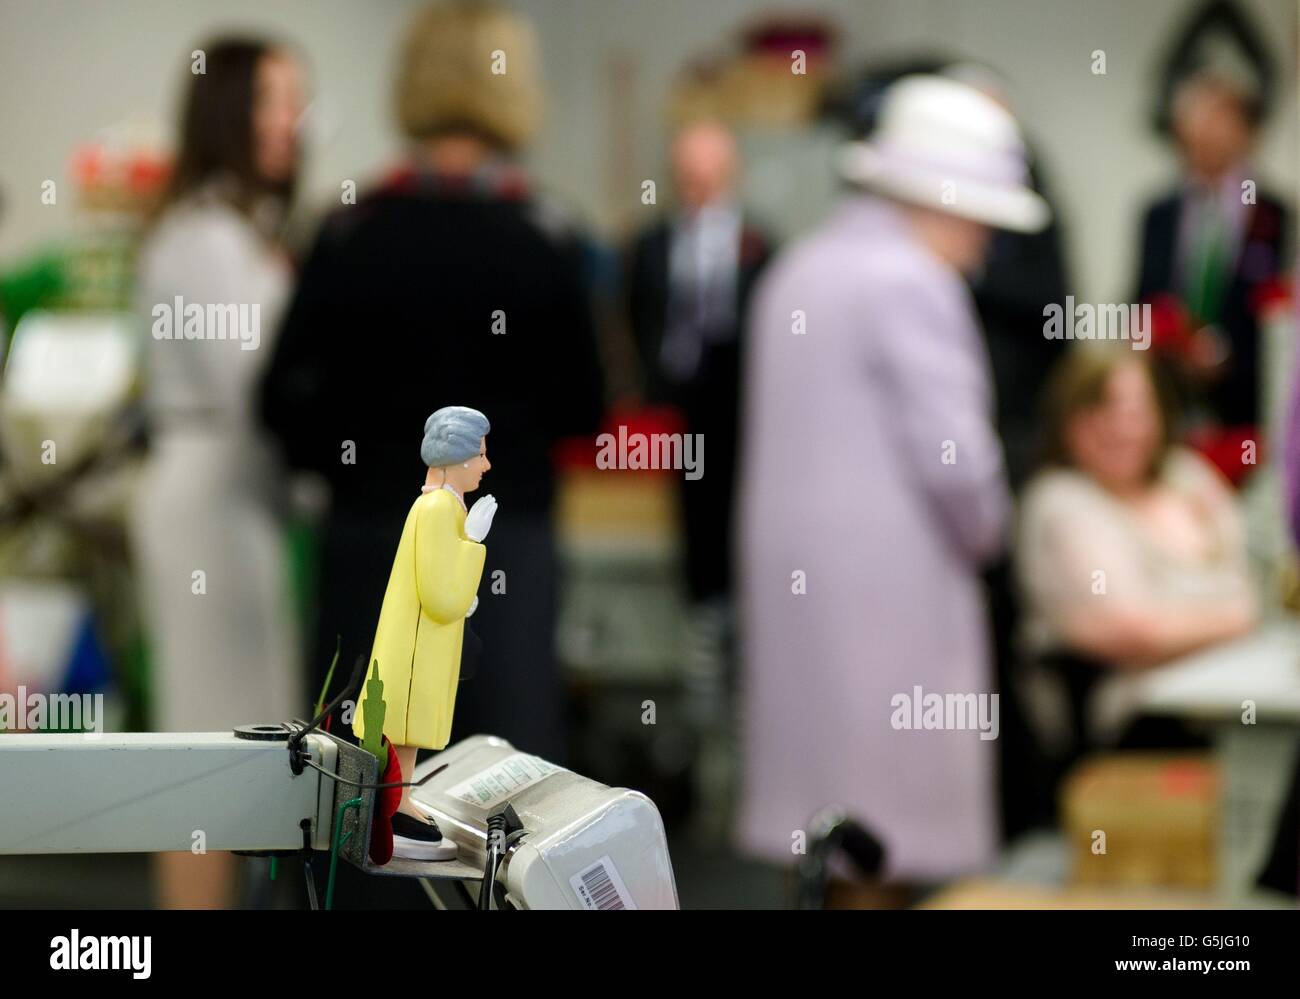 A solar-powered model of Britain's Queen Elizabeth II is seen as the Queen herself watches an employee of The Poppy Factory making the red emblem of the British Legion's annual poppy appeal, during a visit to the company headquarters in Richmond, London. Stock Photo